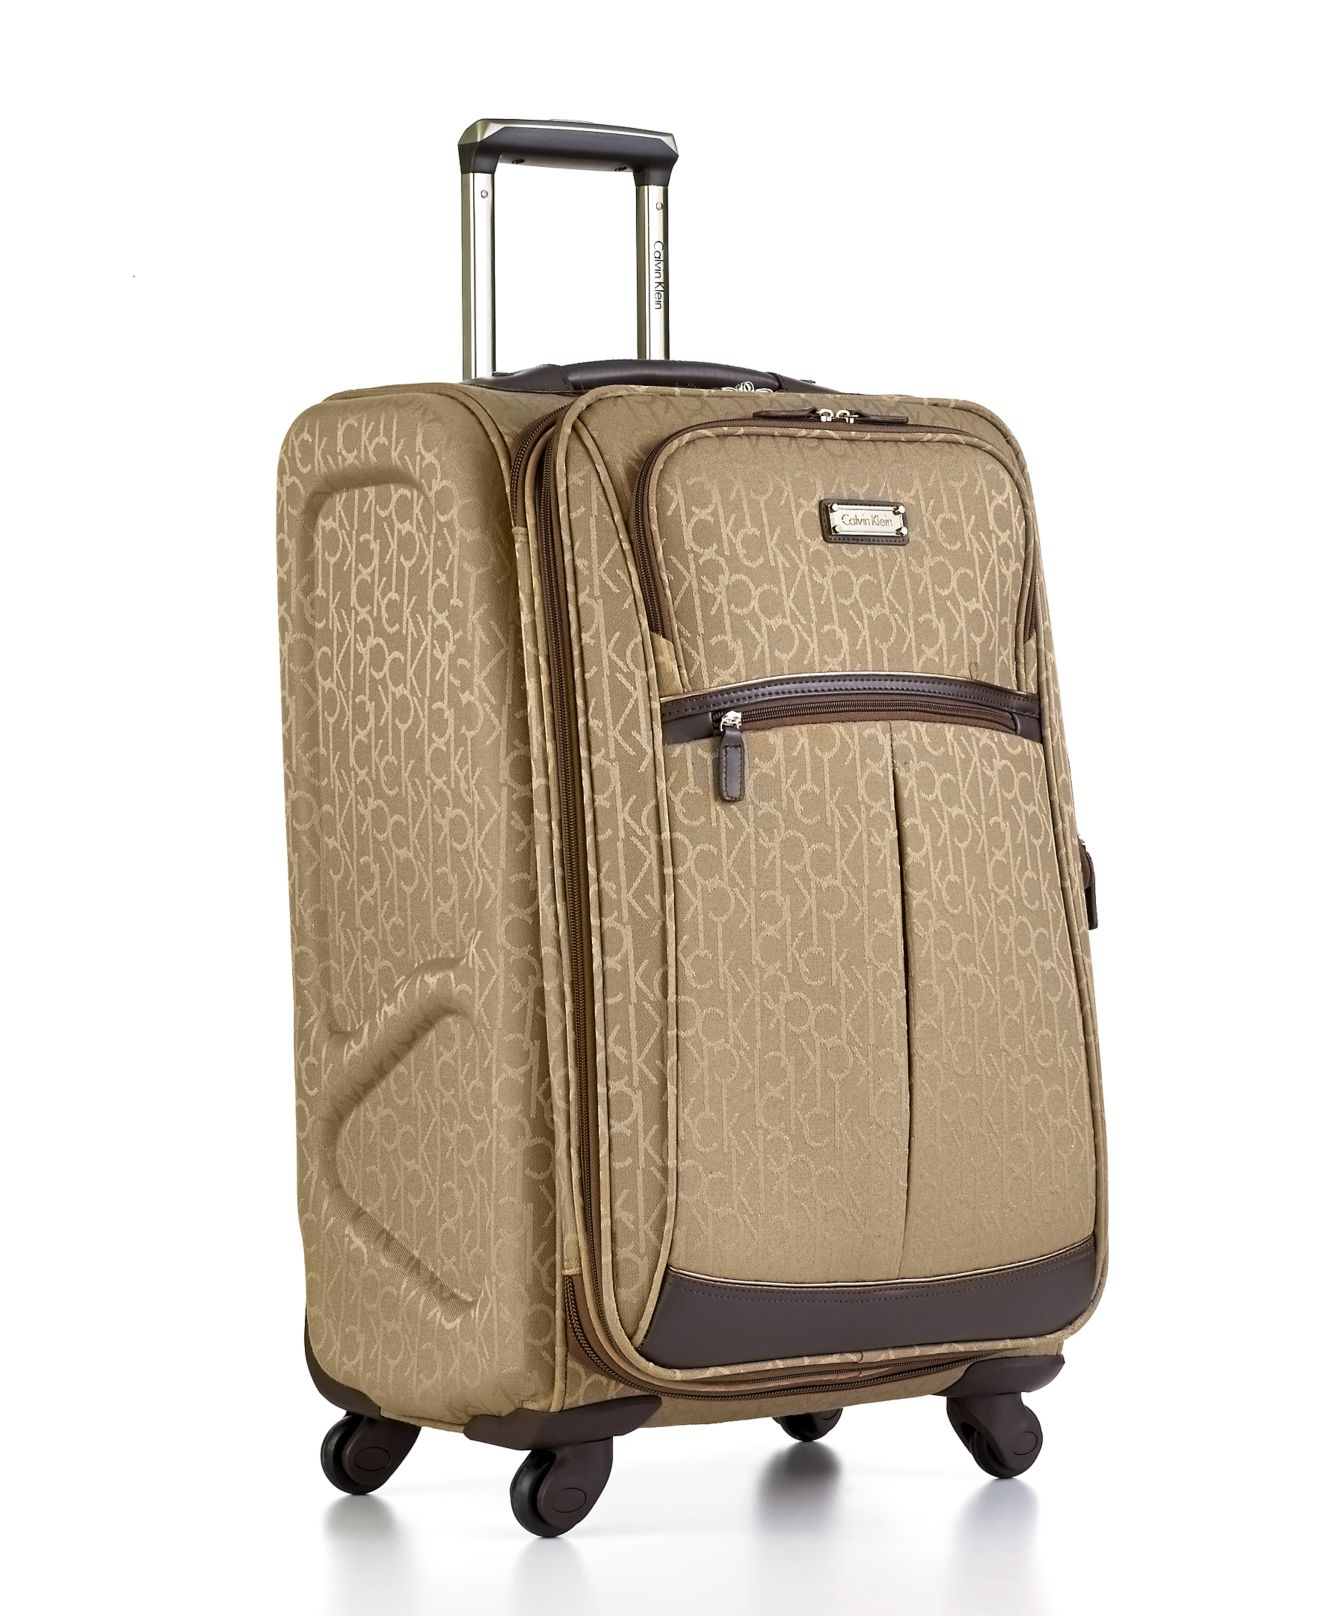 calvin klein luggage pink and brown,Quality assurance,protein-burger.com